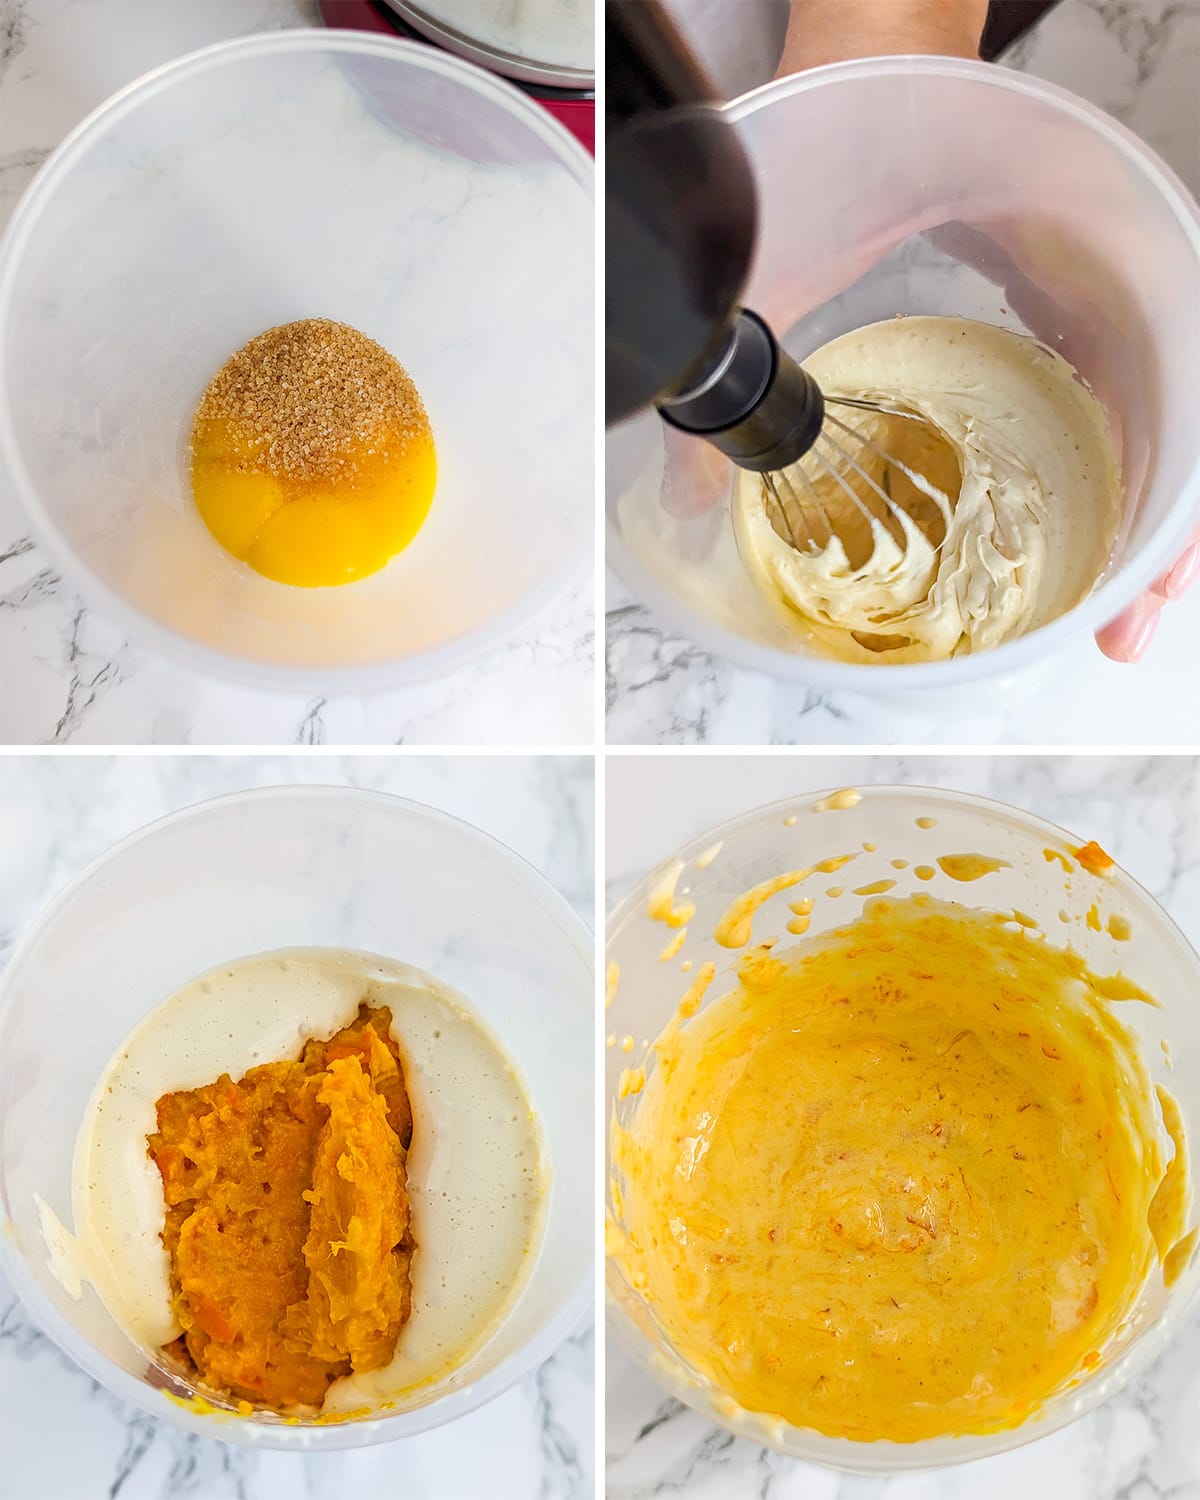 Step-by-step process of mixing eggs with sugar and mandarin puree.